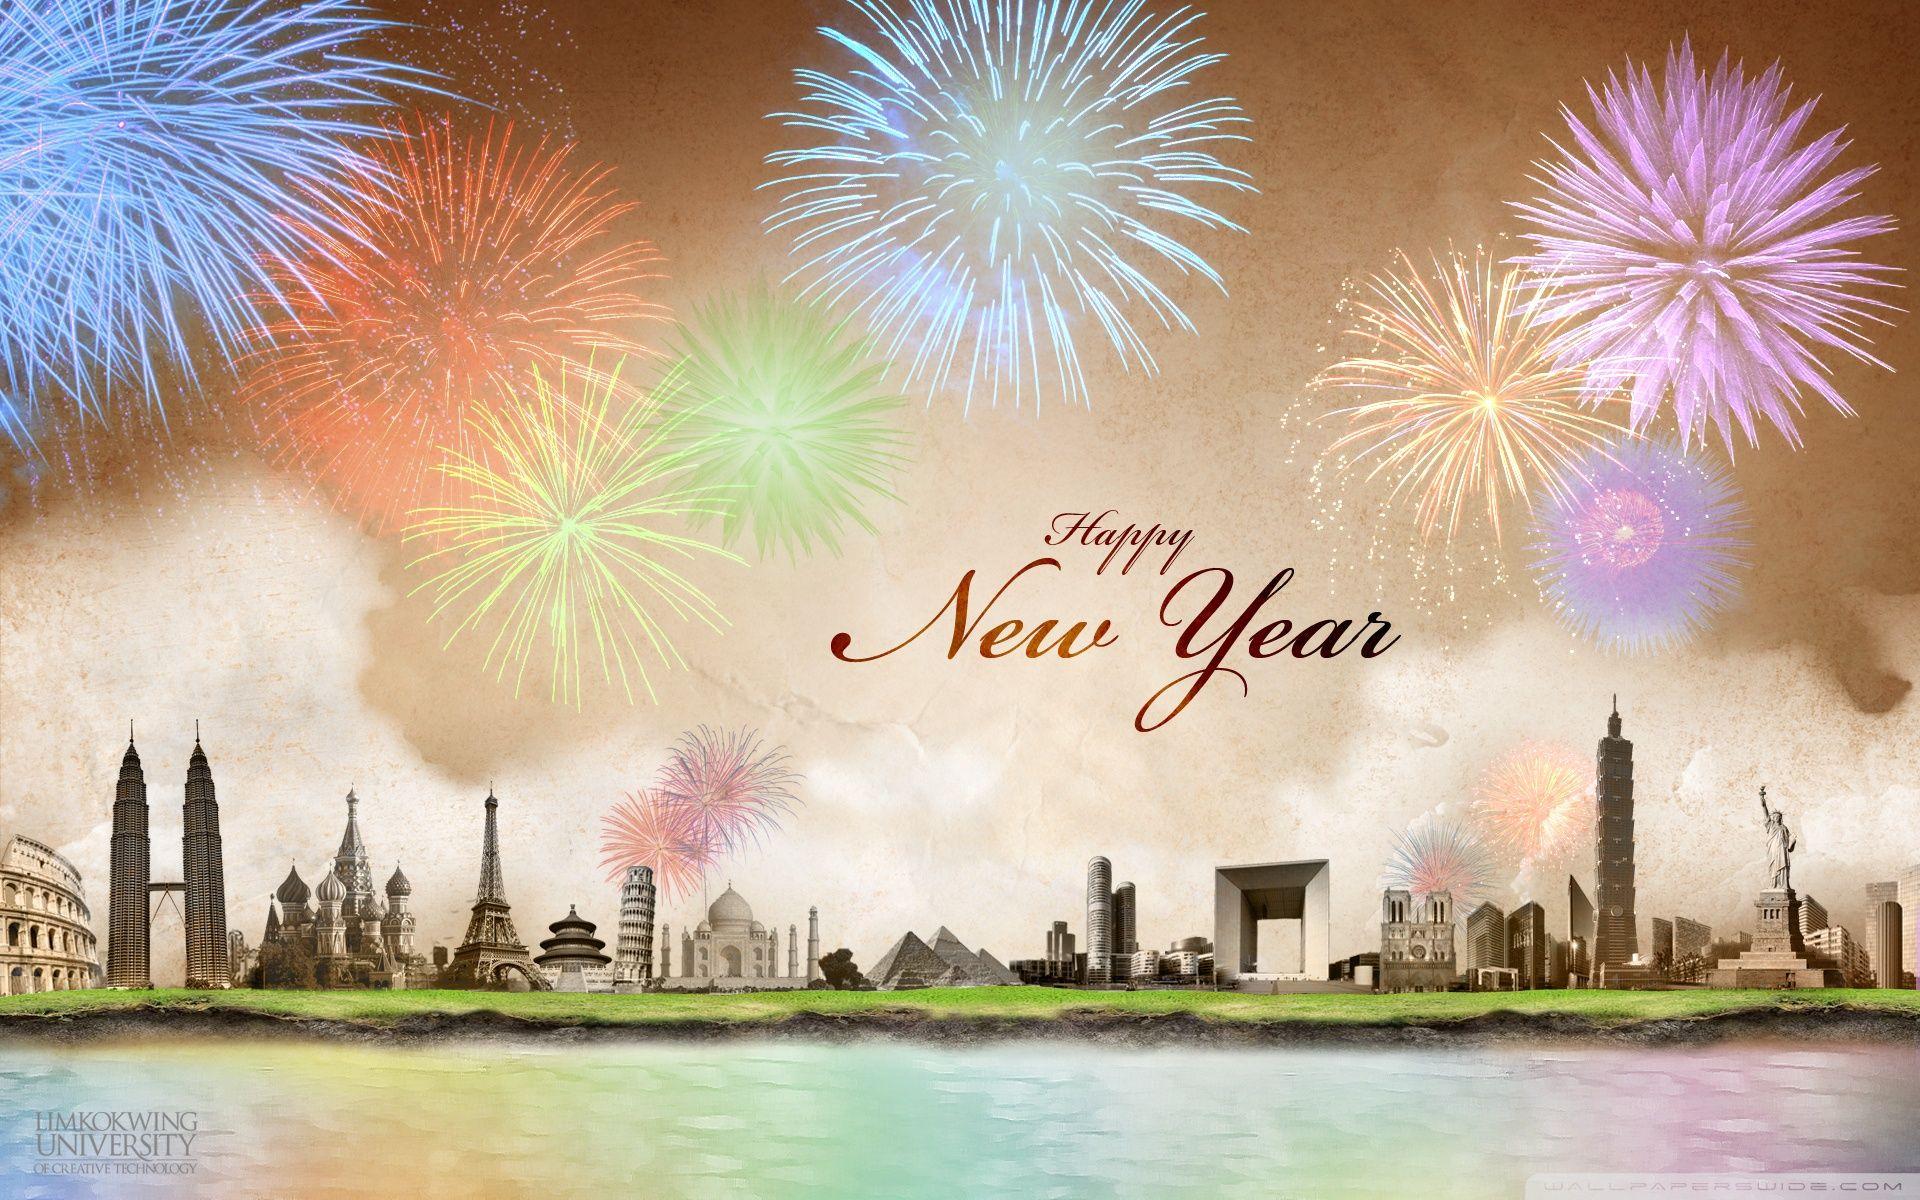 Happy New Year HD Wallpaper Free Happy New Year HD Background